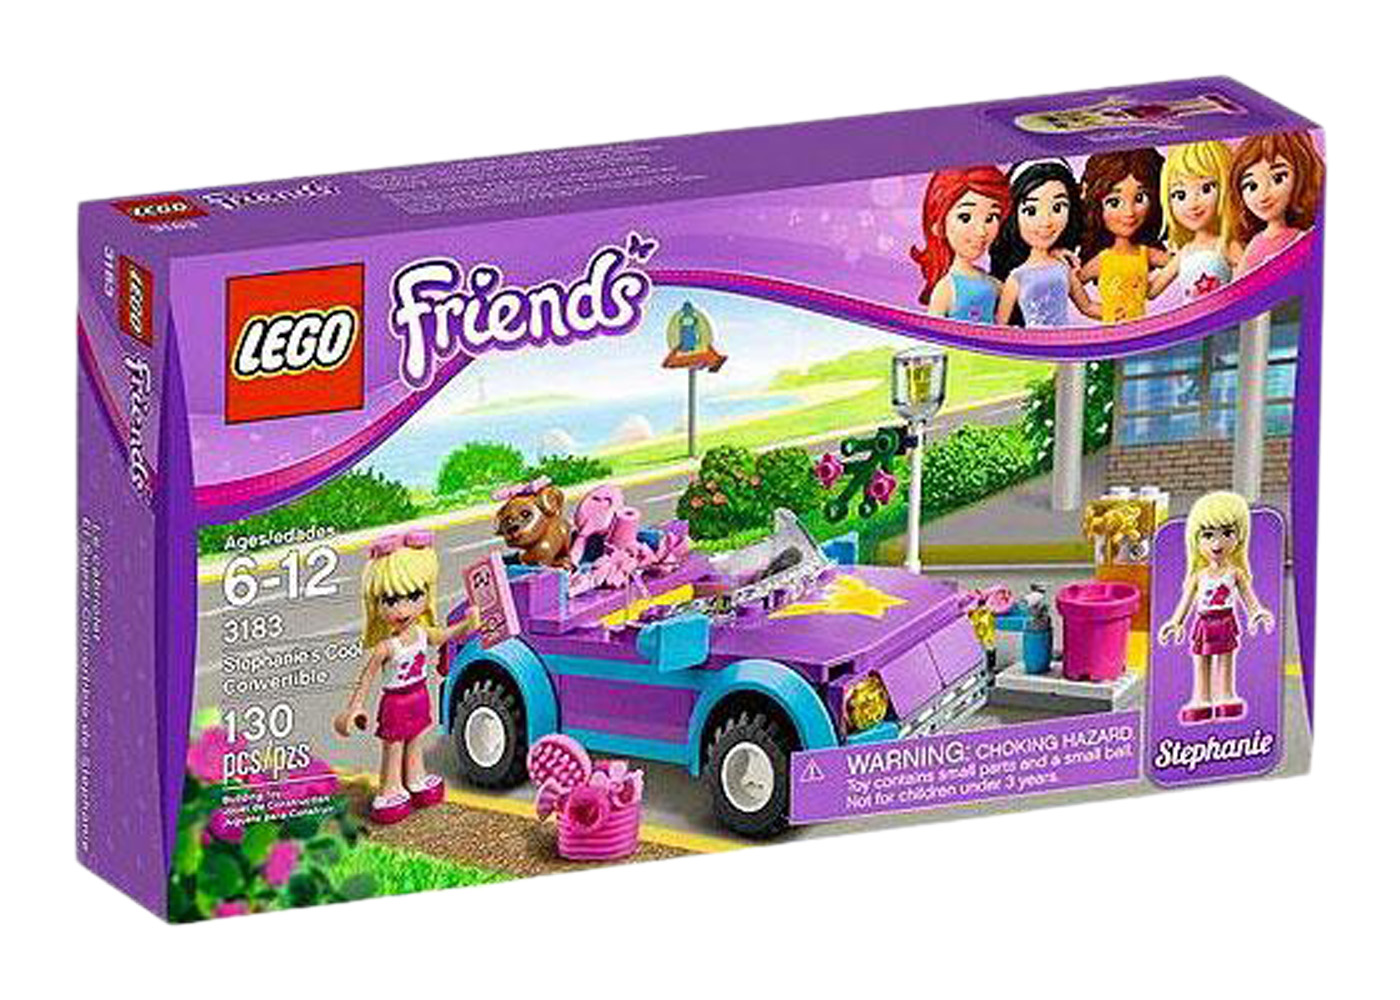 LEGO Friends Stephanie's Cool Convertible Set 3183 - US